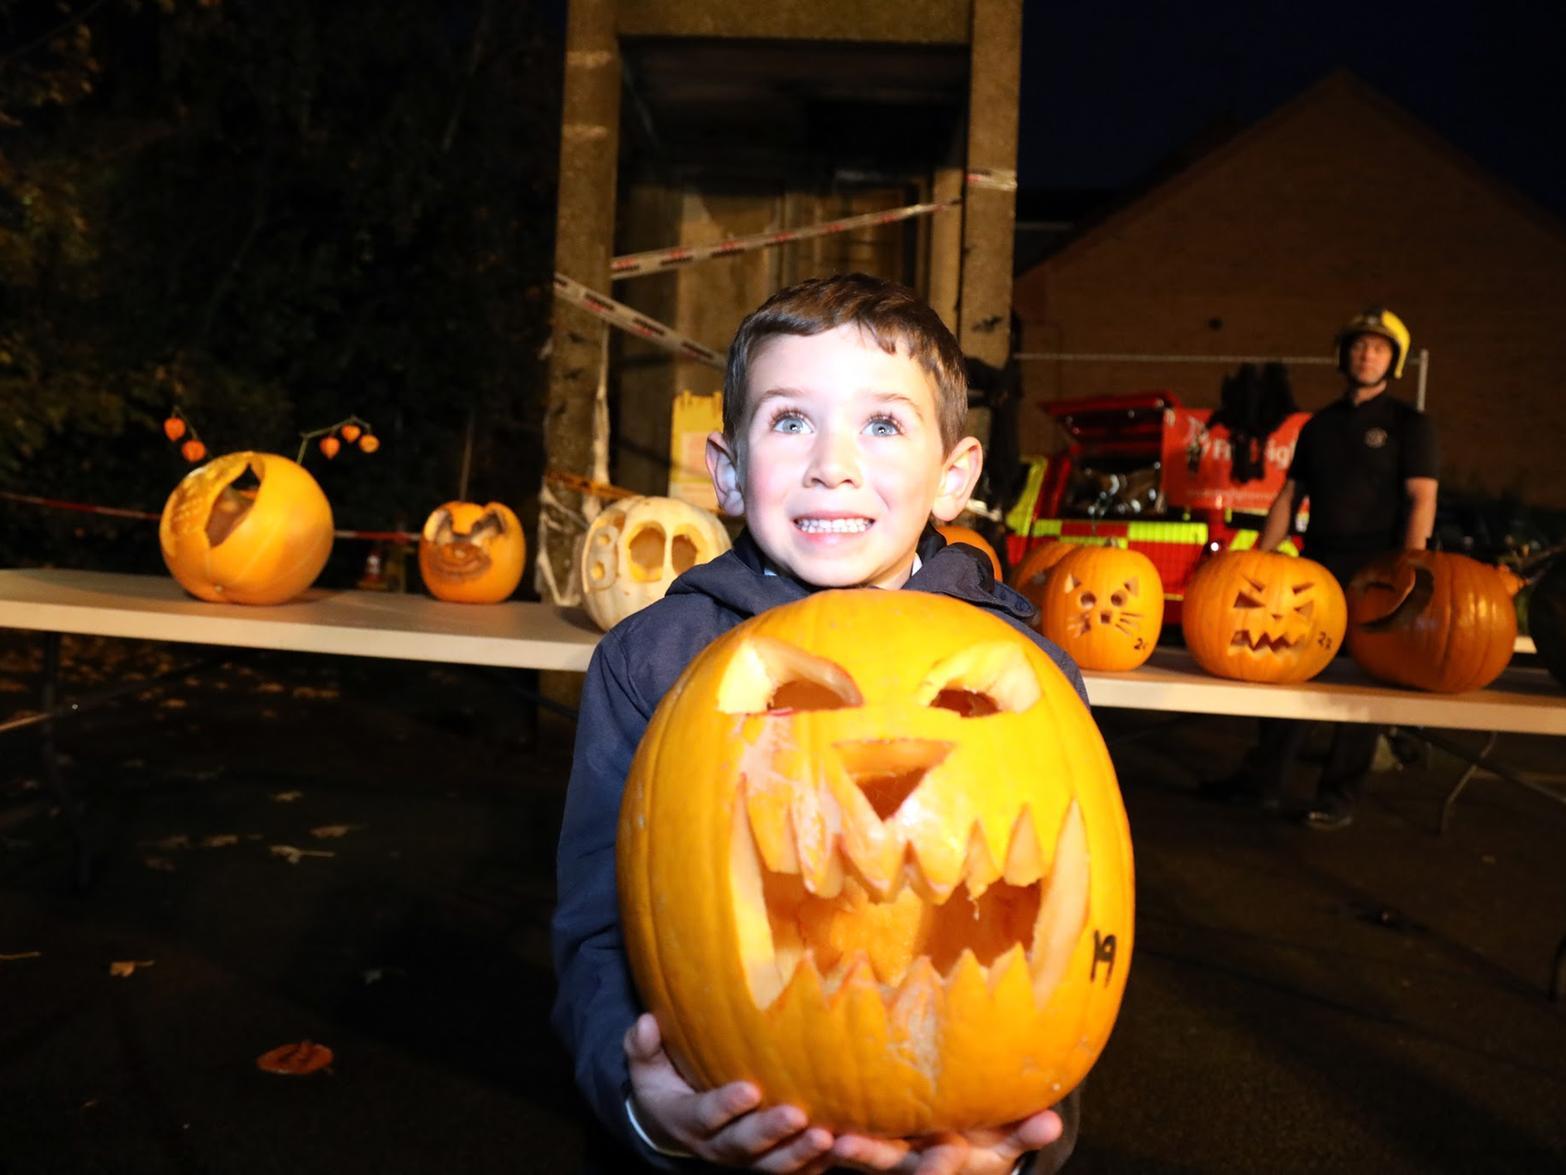 One young participant with his pumpkin